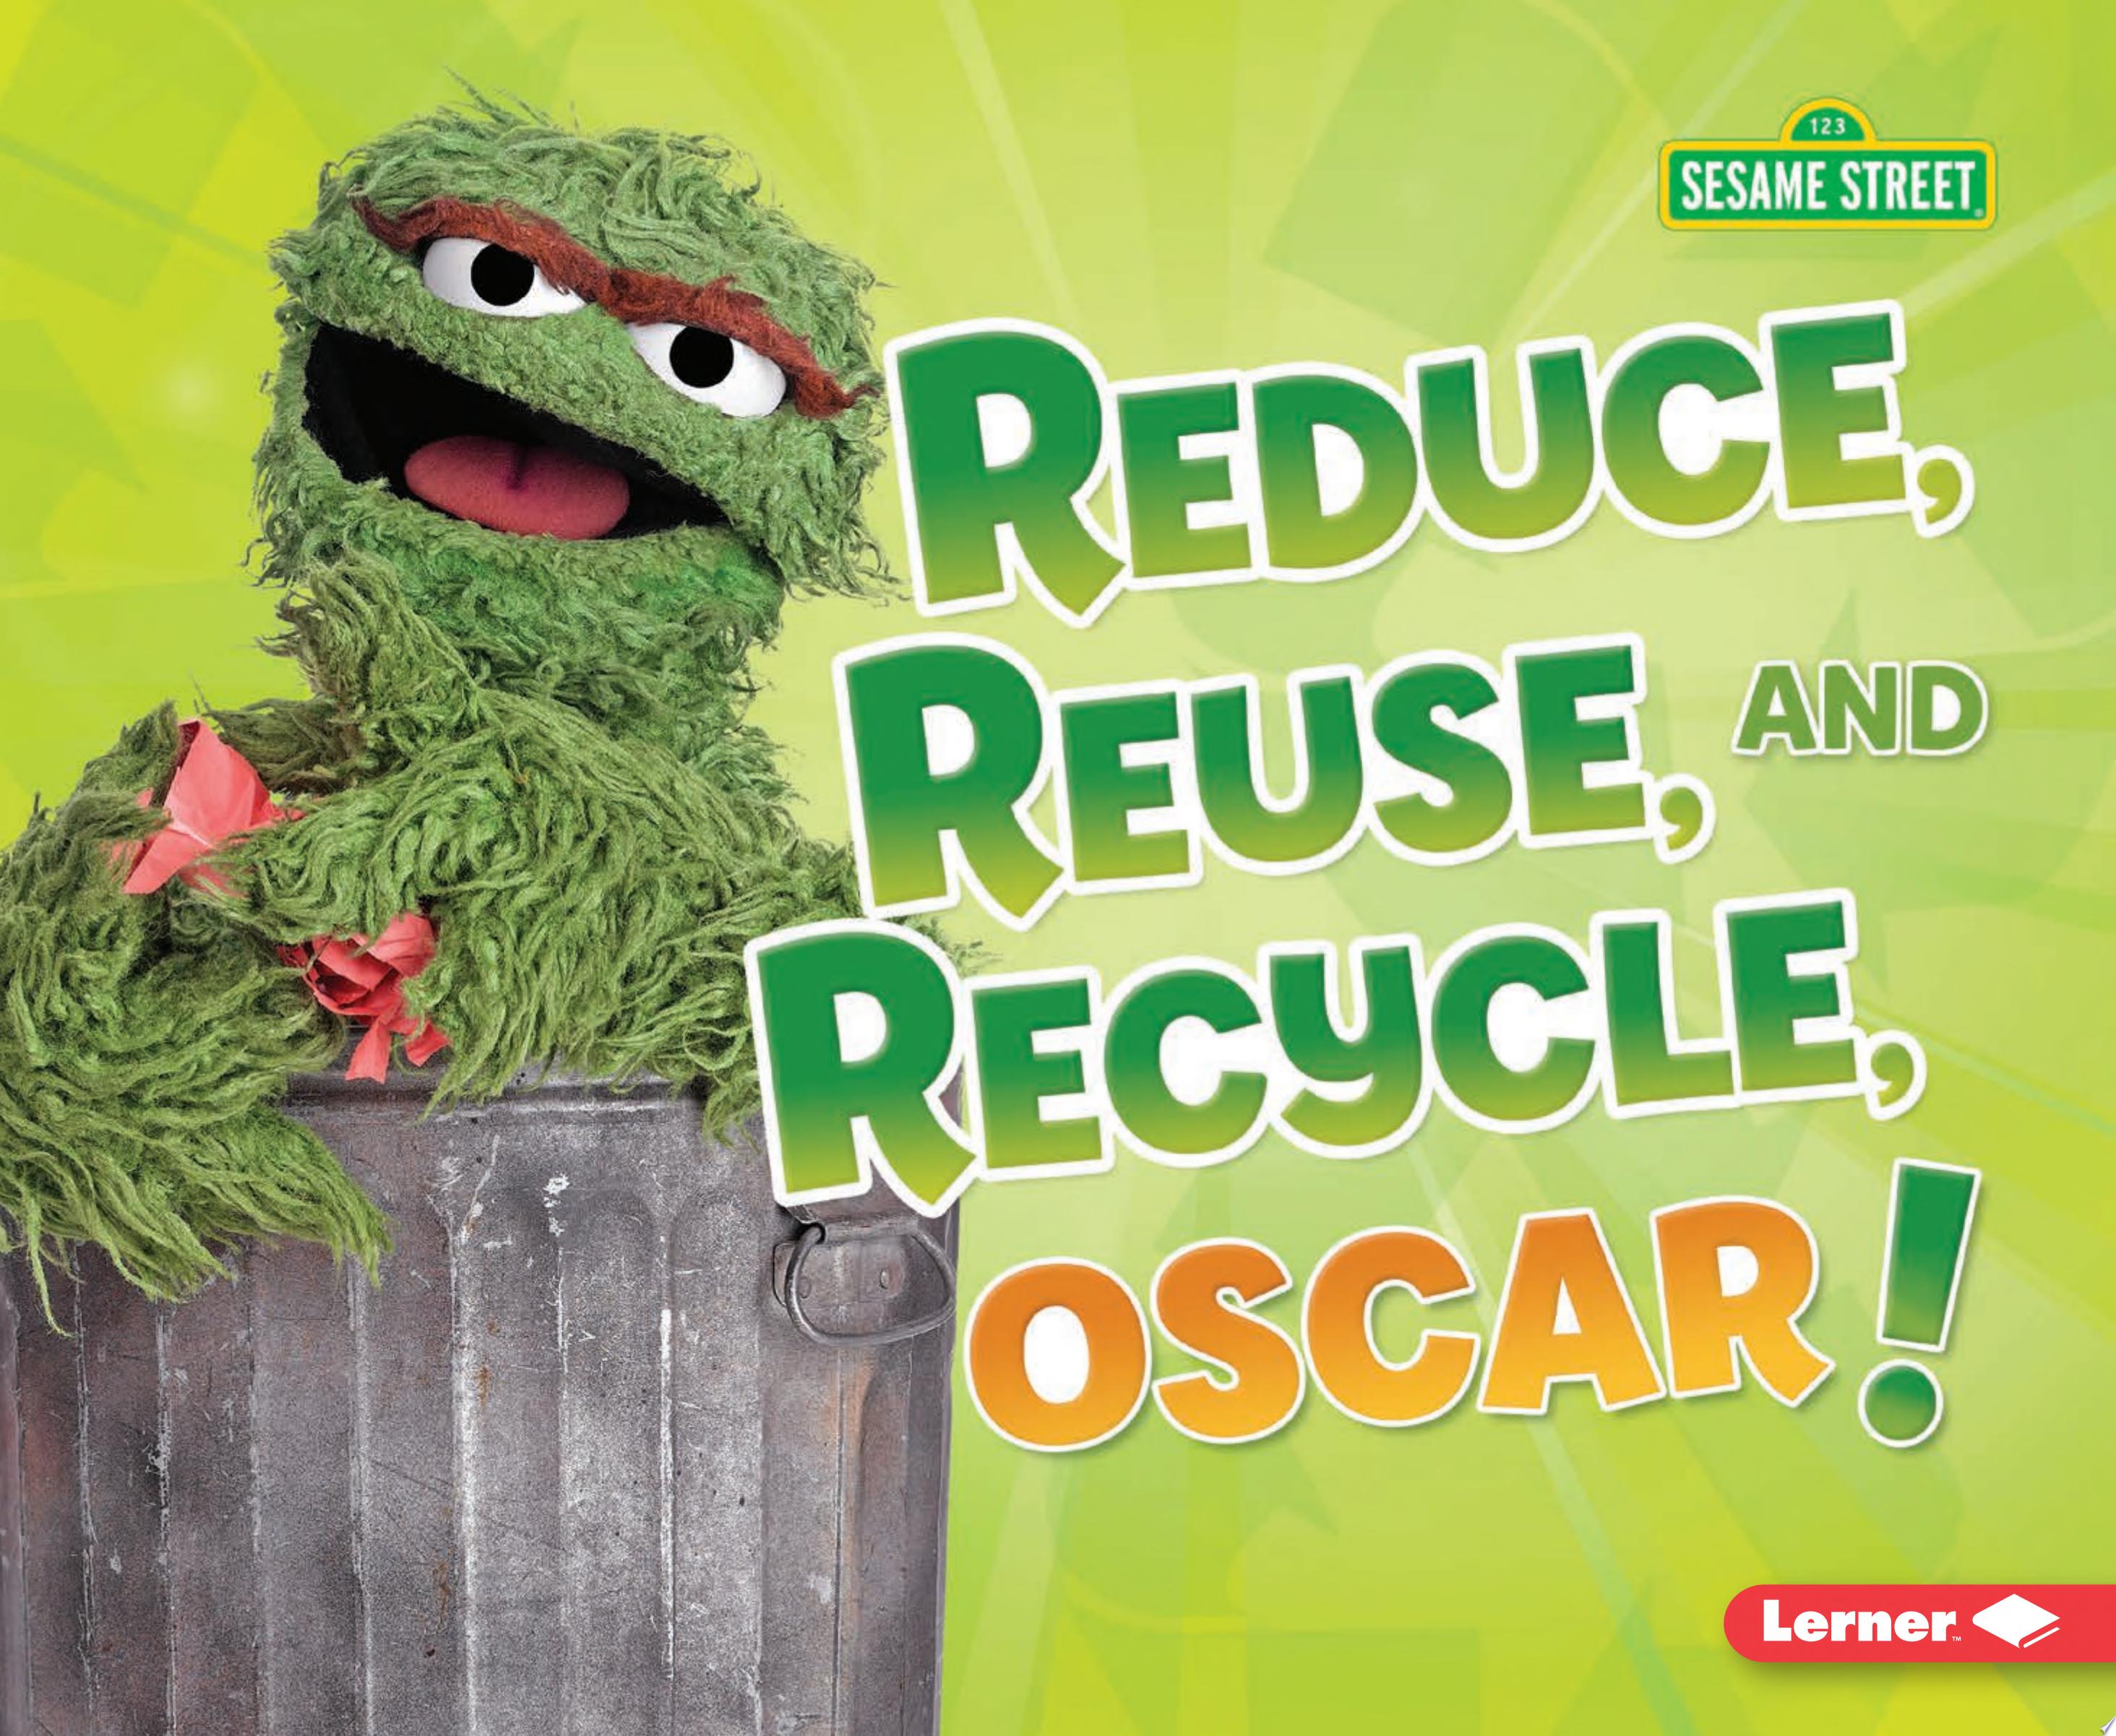 Image for "Reduce, Reuse, and Recycle, Oscar!"